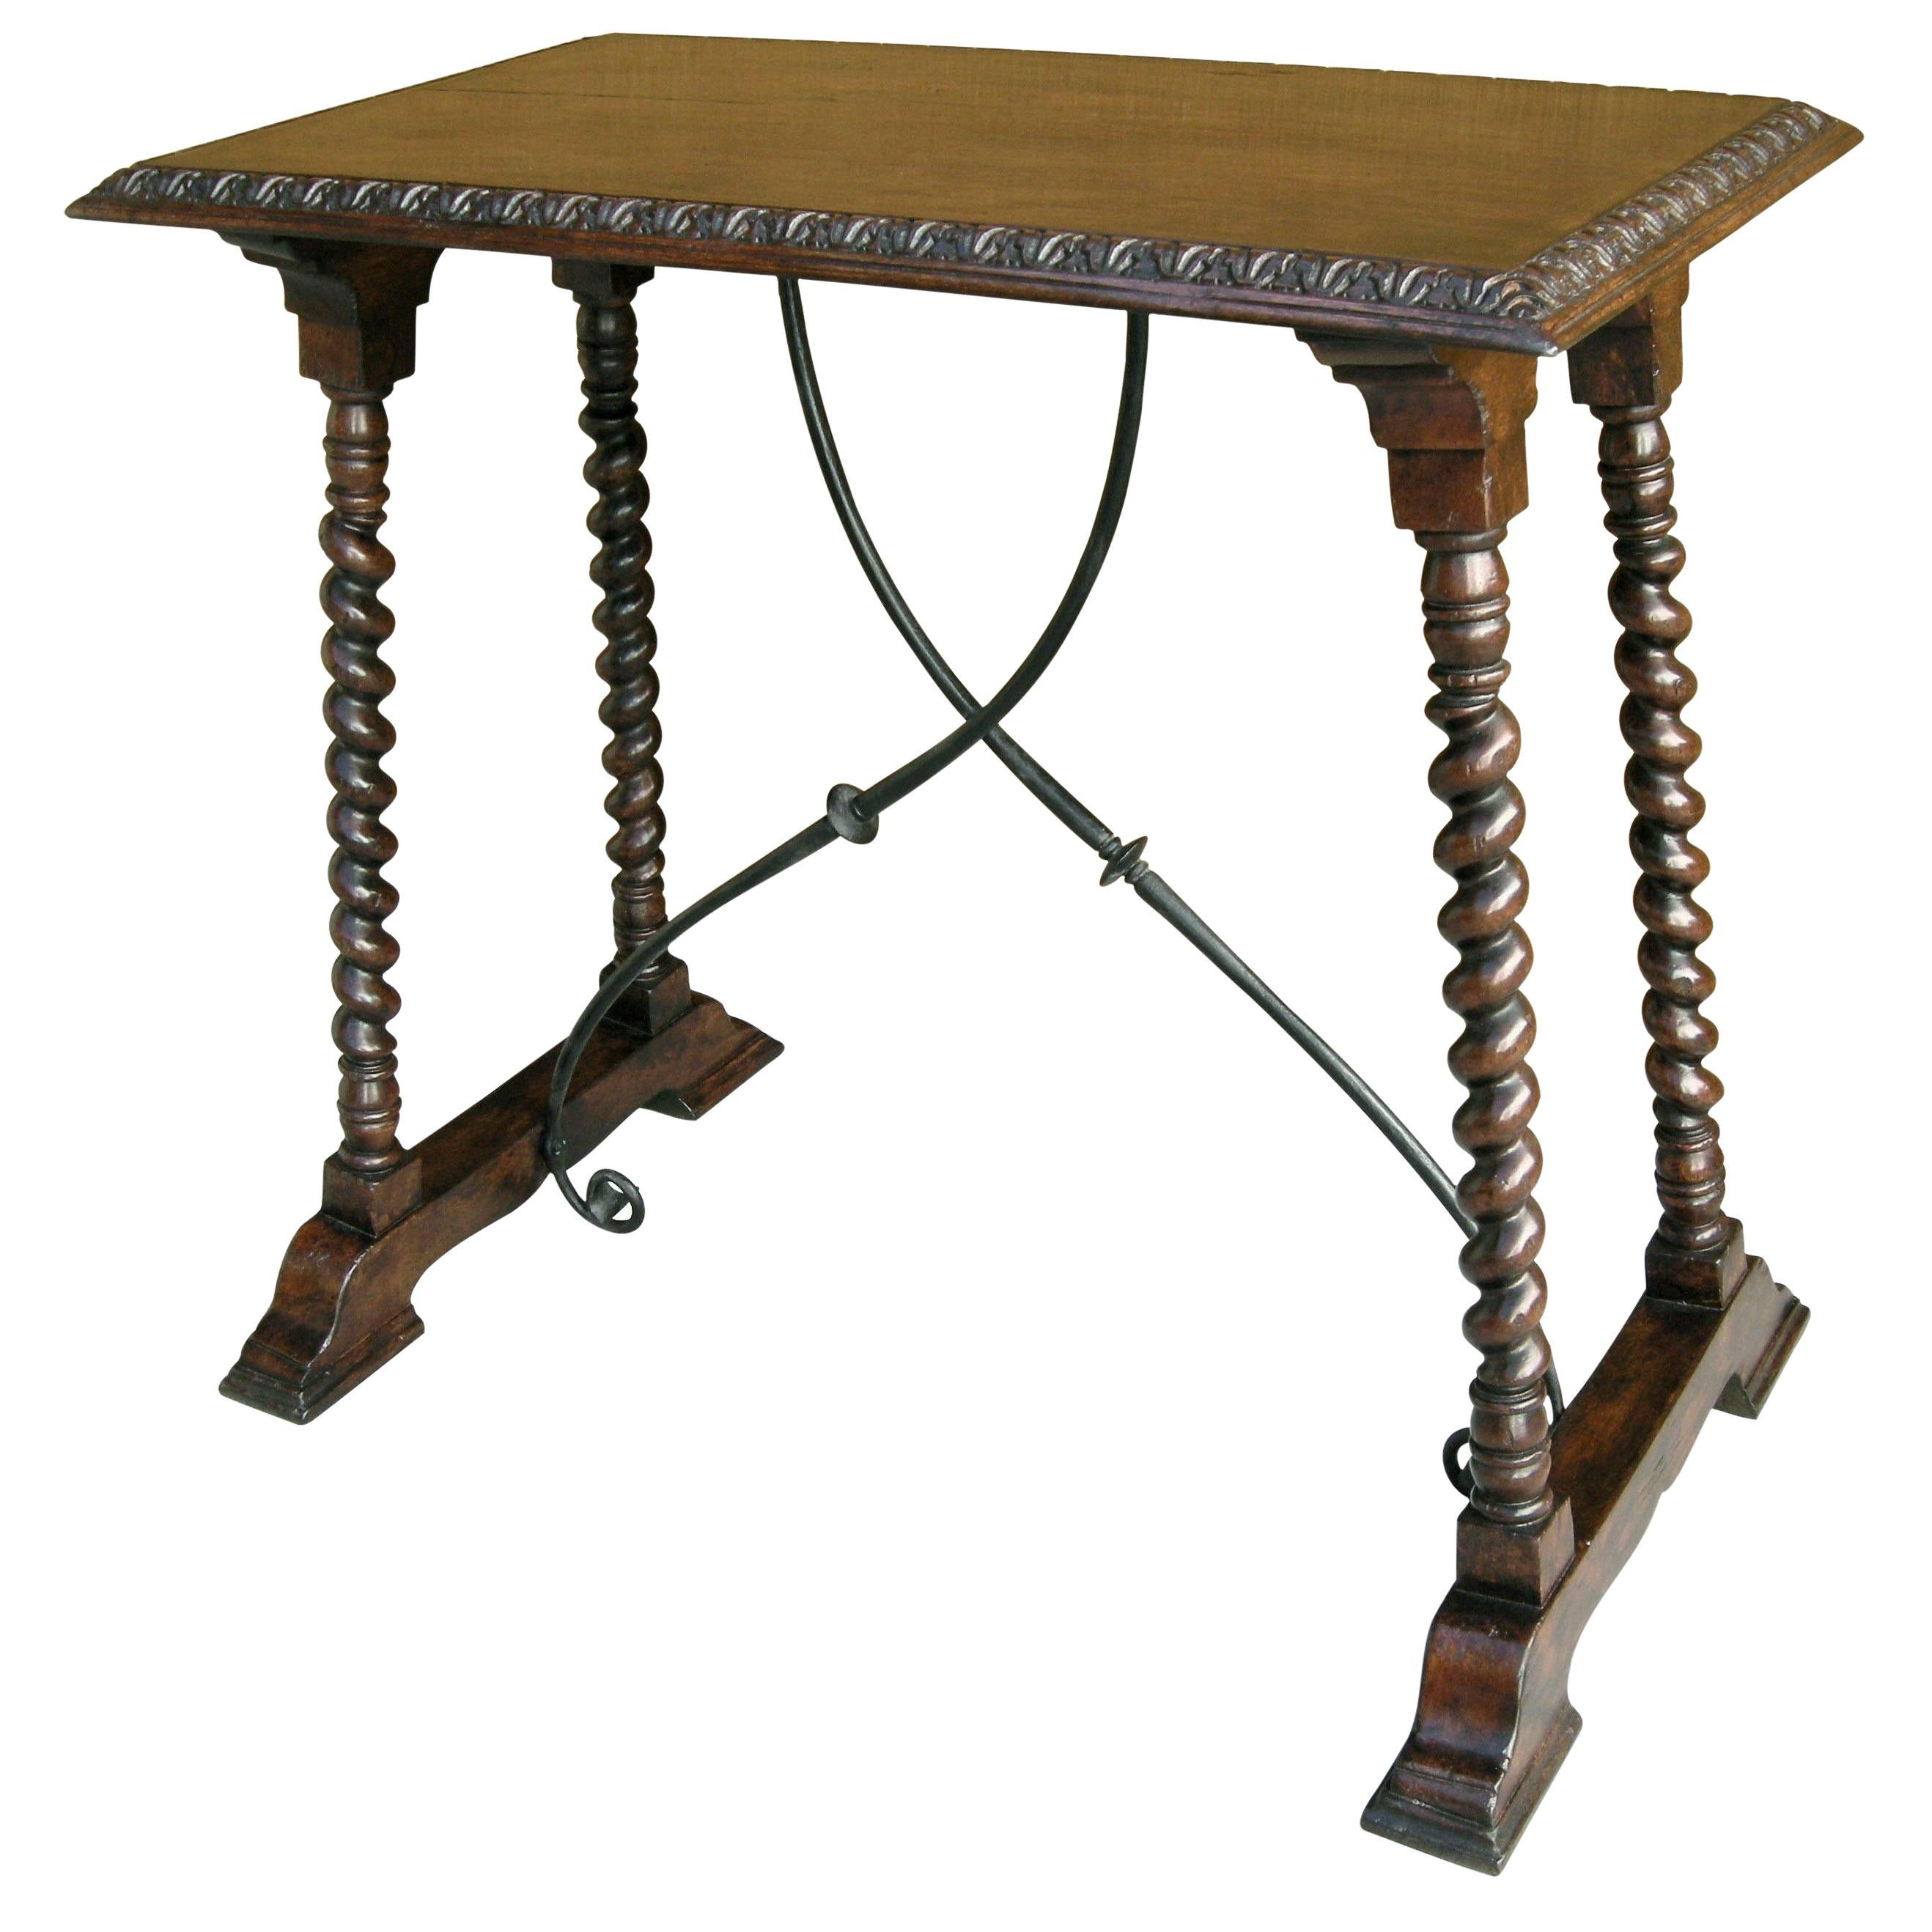 Carved Italian walnut and wrought iron Sorrento side table by Randy Esada

Item #: 9029 - Sorrento side table
Finish: Distressed dark walnut and aged iron
Dimensions: Top 32 W x 18.5 D
Base 34 W x 21 D x 30.5 H
2 in stock, quantity order